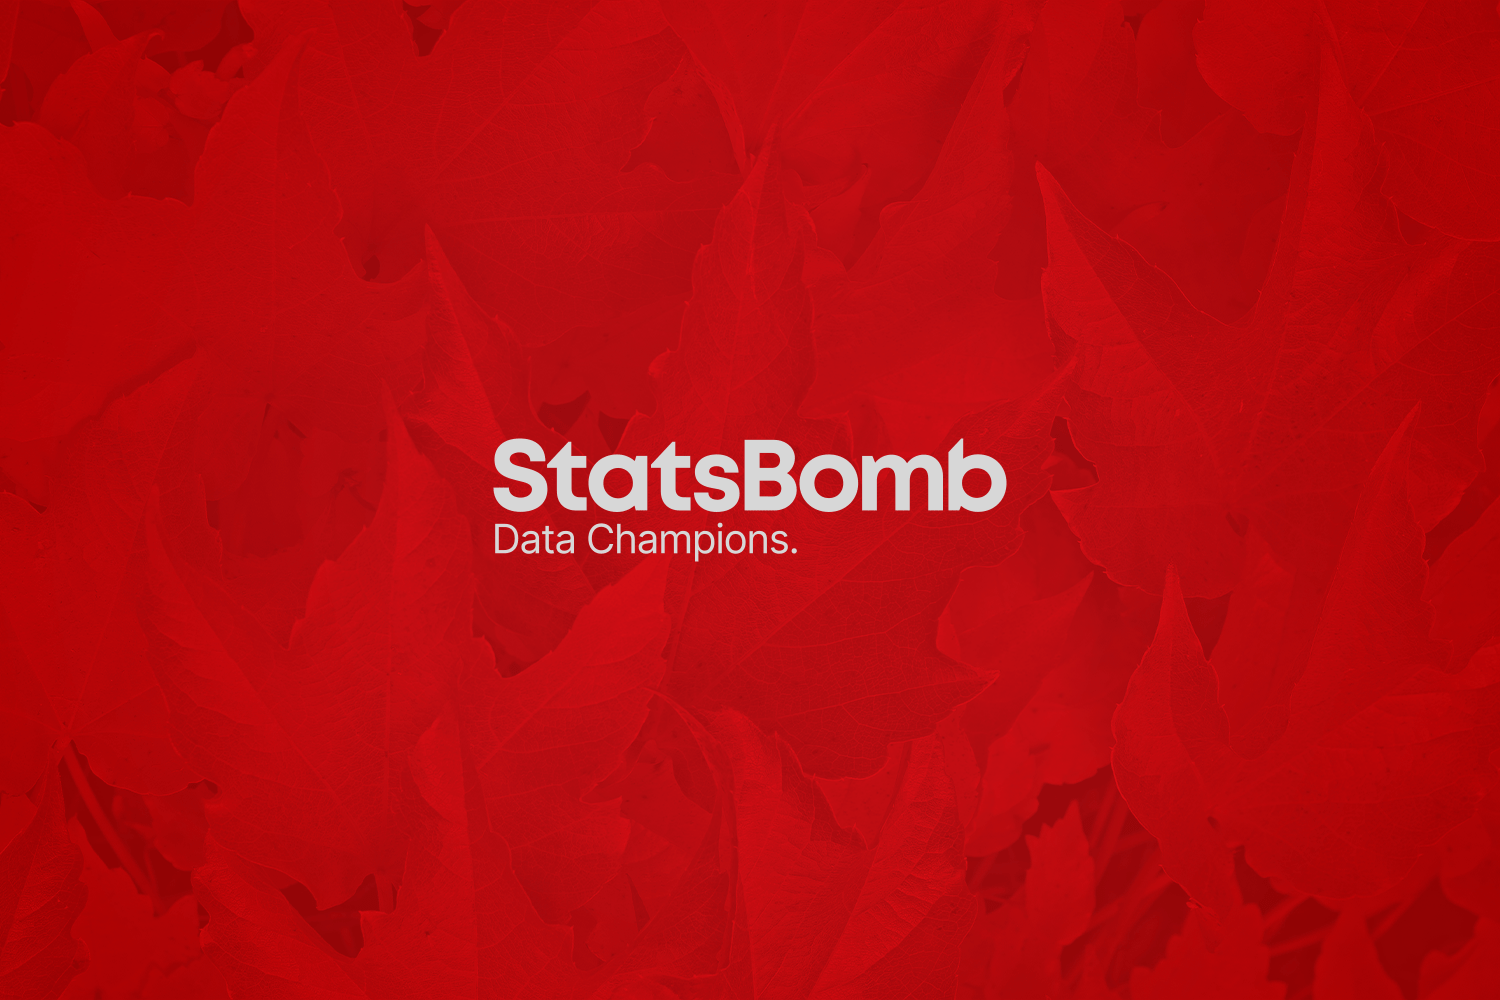 StatsBomb Renews Service Agreement with Canada Soccer